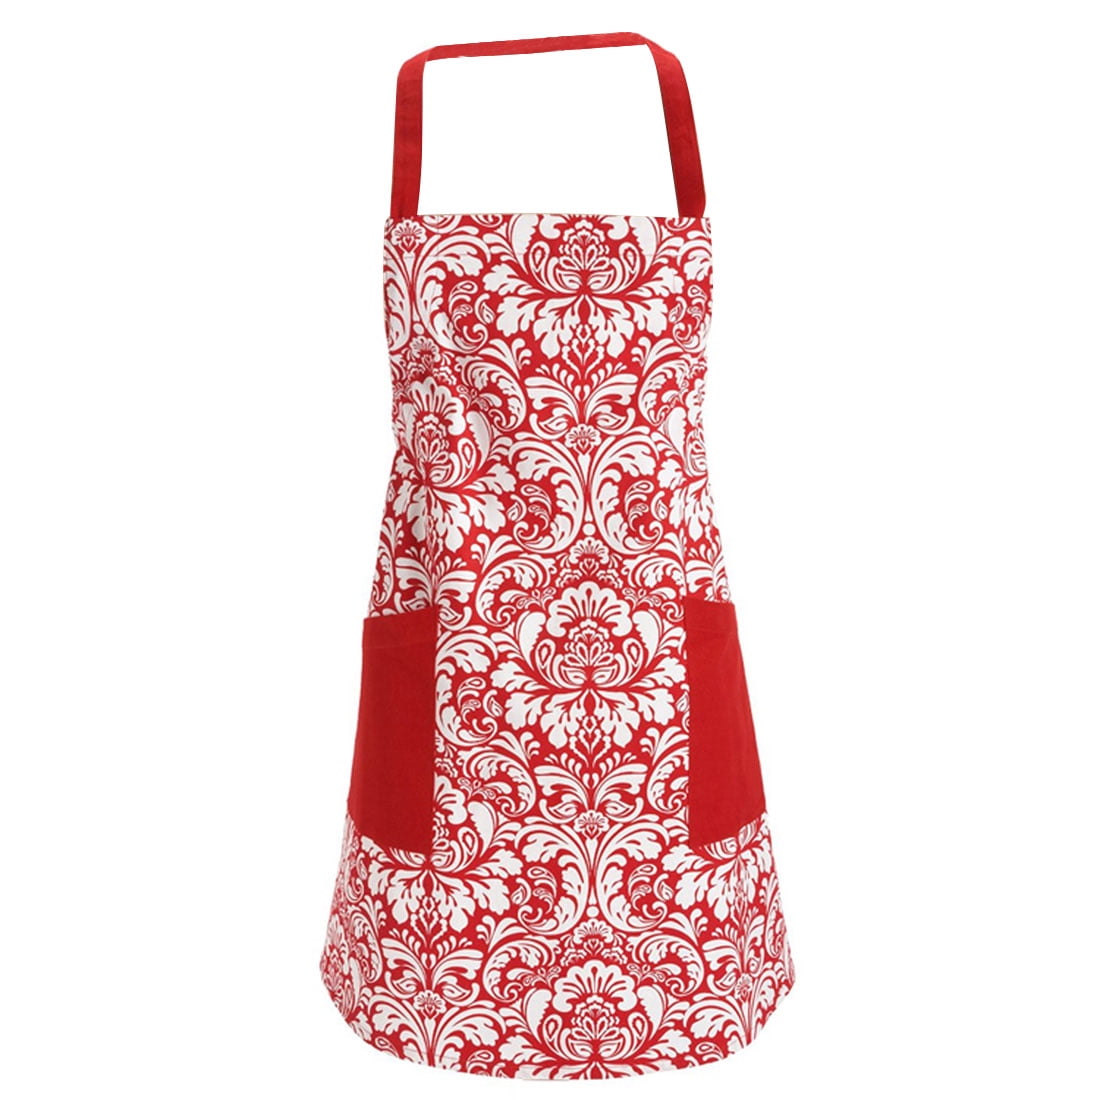 Kitchen Apron Cooking Apron Baking Apron With 2 Pockets Red 